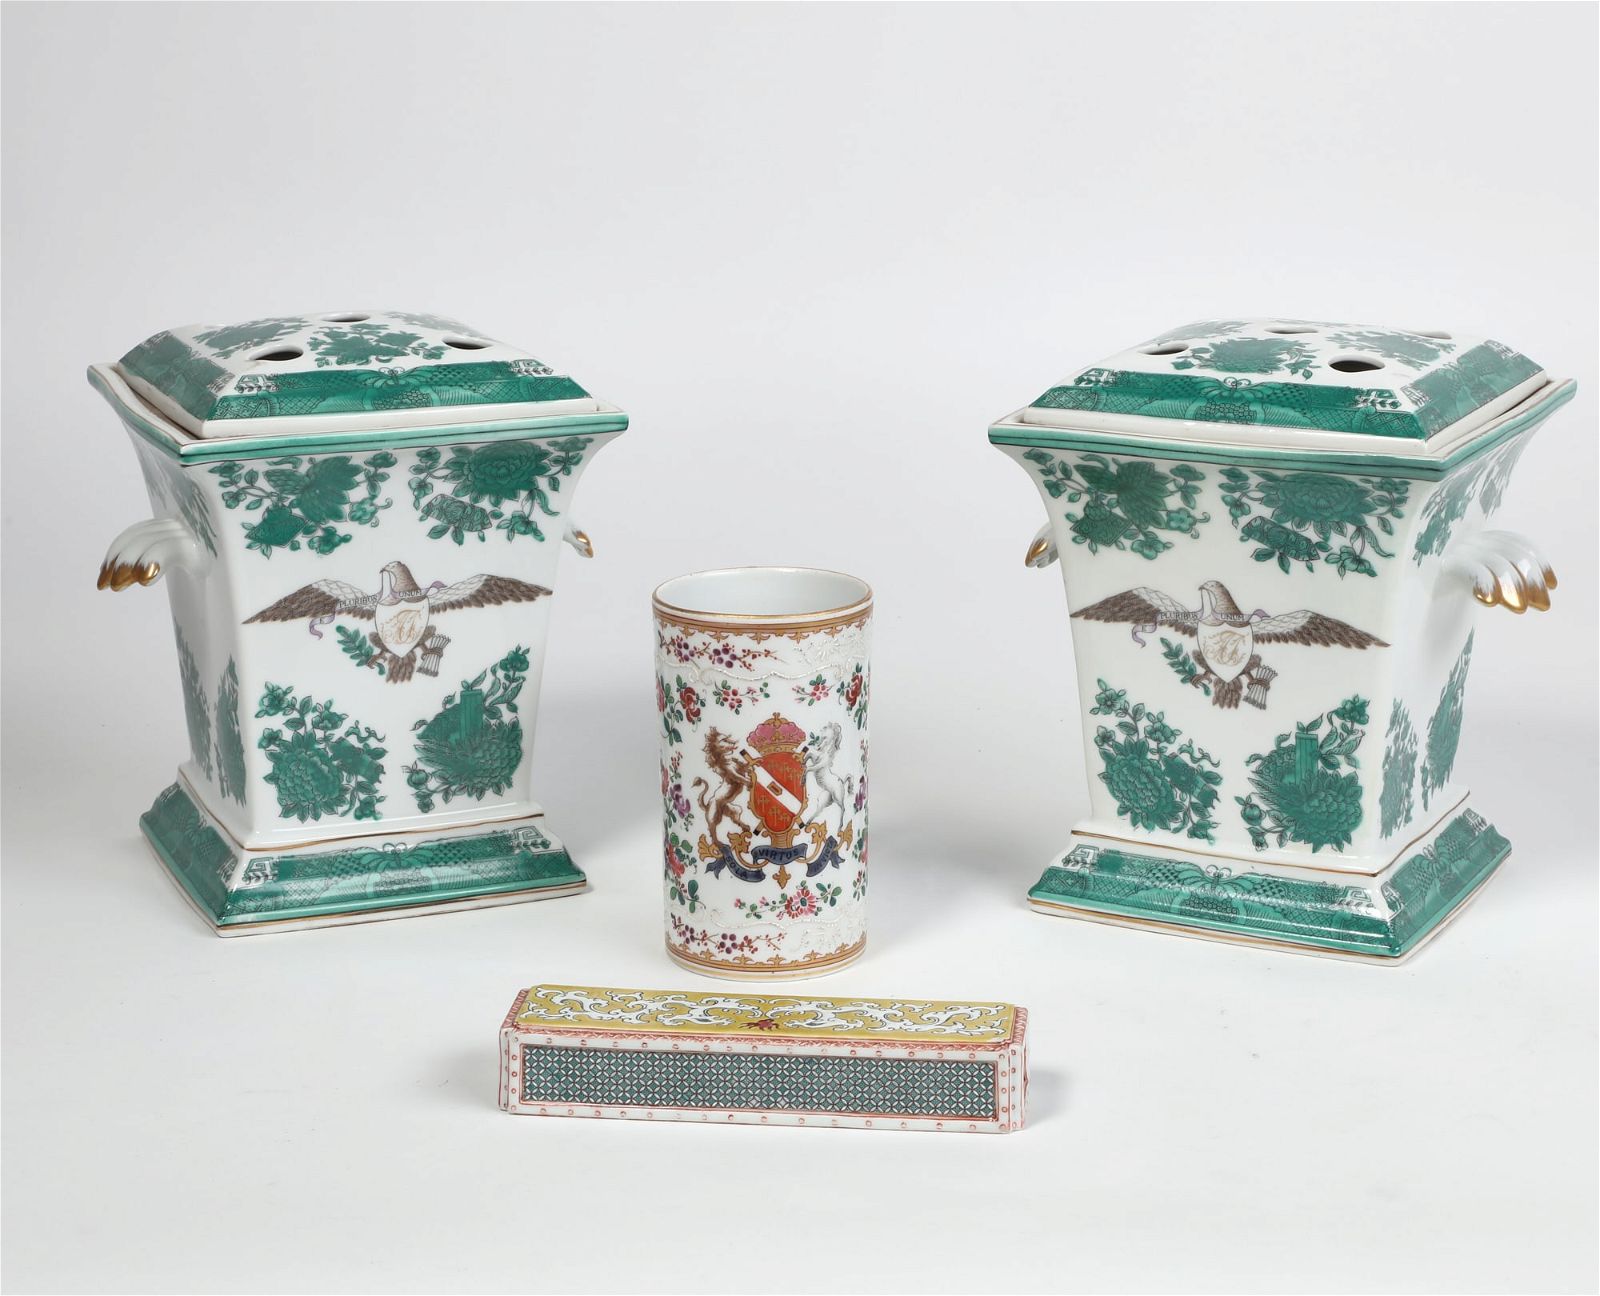 FOUR CHINESE GLAZED PORCELAIN TABLE 2fb2dad